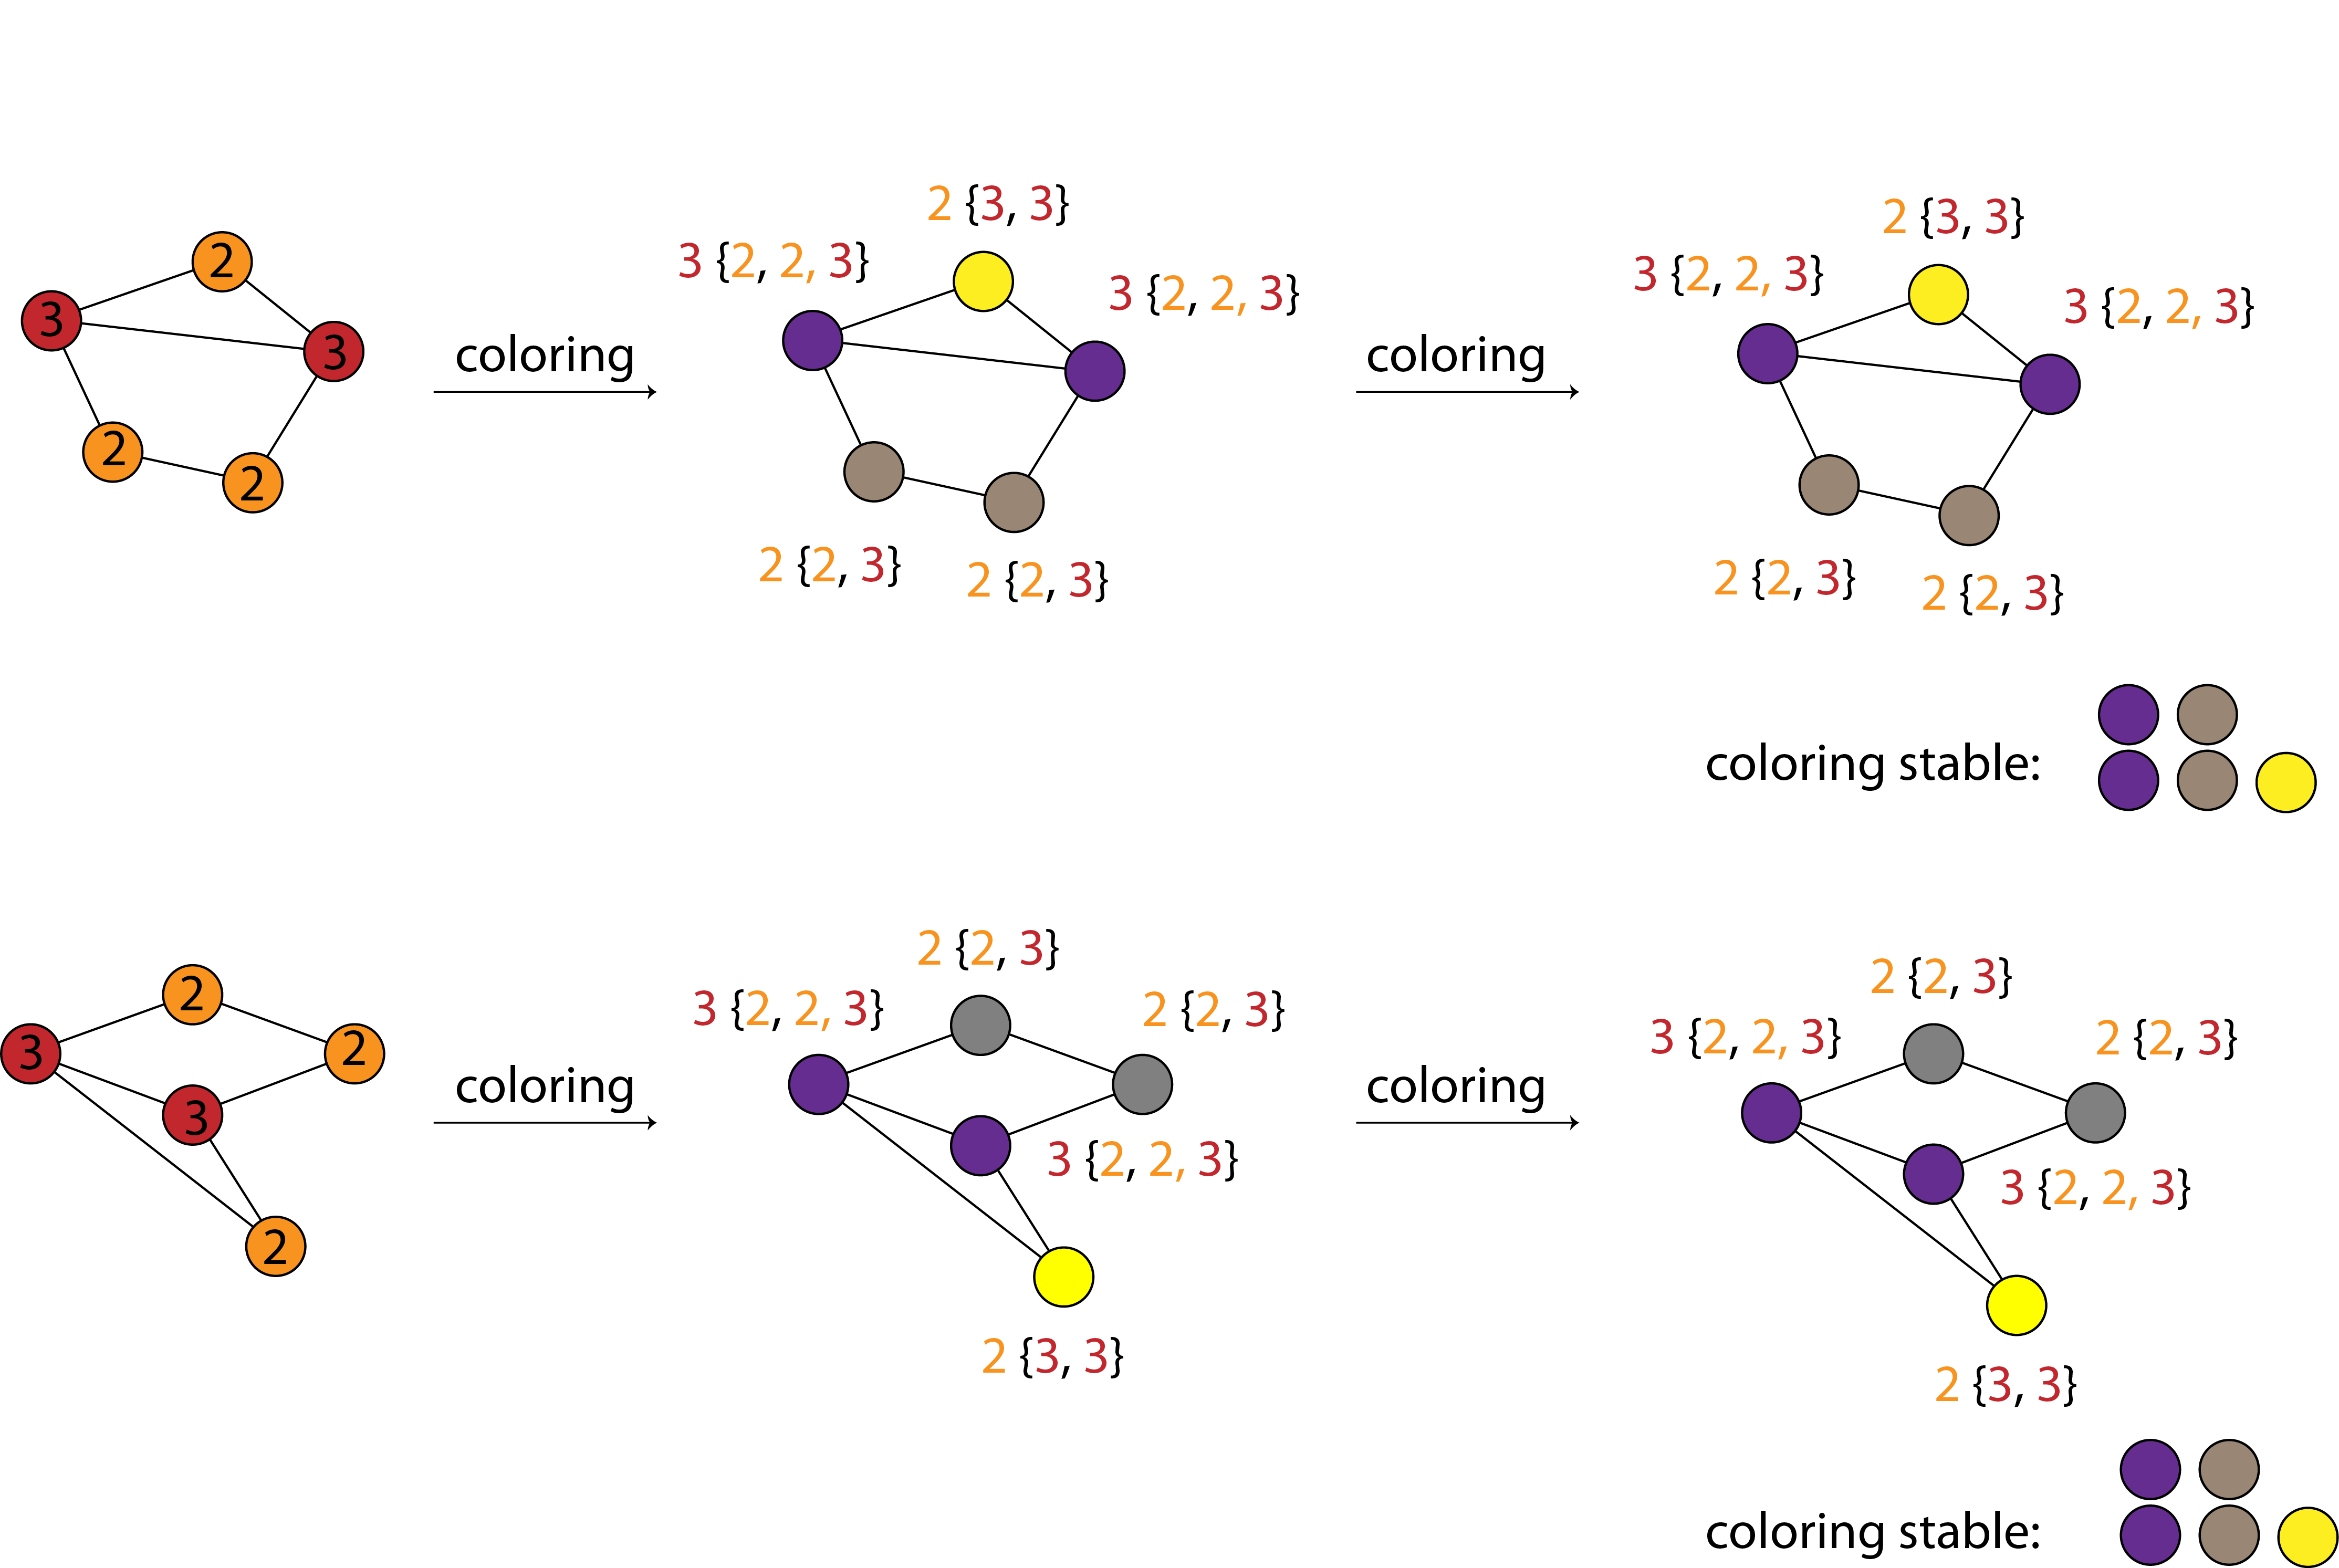 Illustration of the WL hashing algorithm, based on https://towardsdatascience.com/expressive-power-of-graph-neural-networks-and-the-weisefeiler-lehman-test-b883db3c7c49.